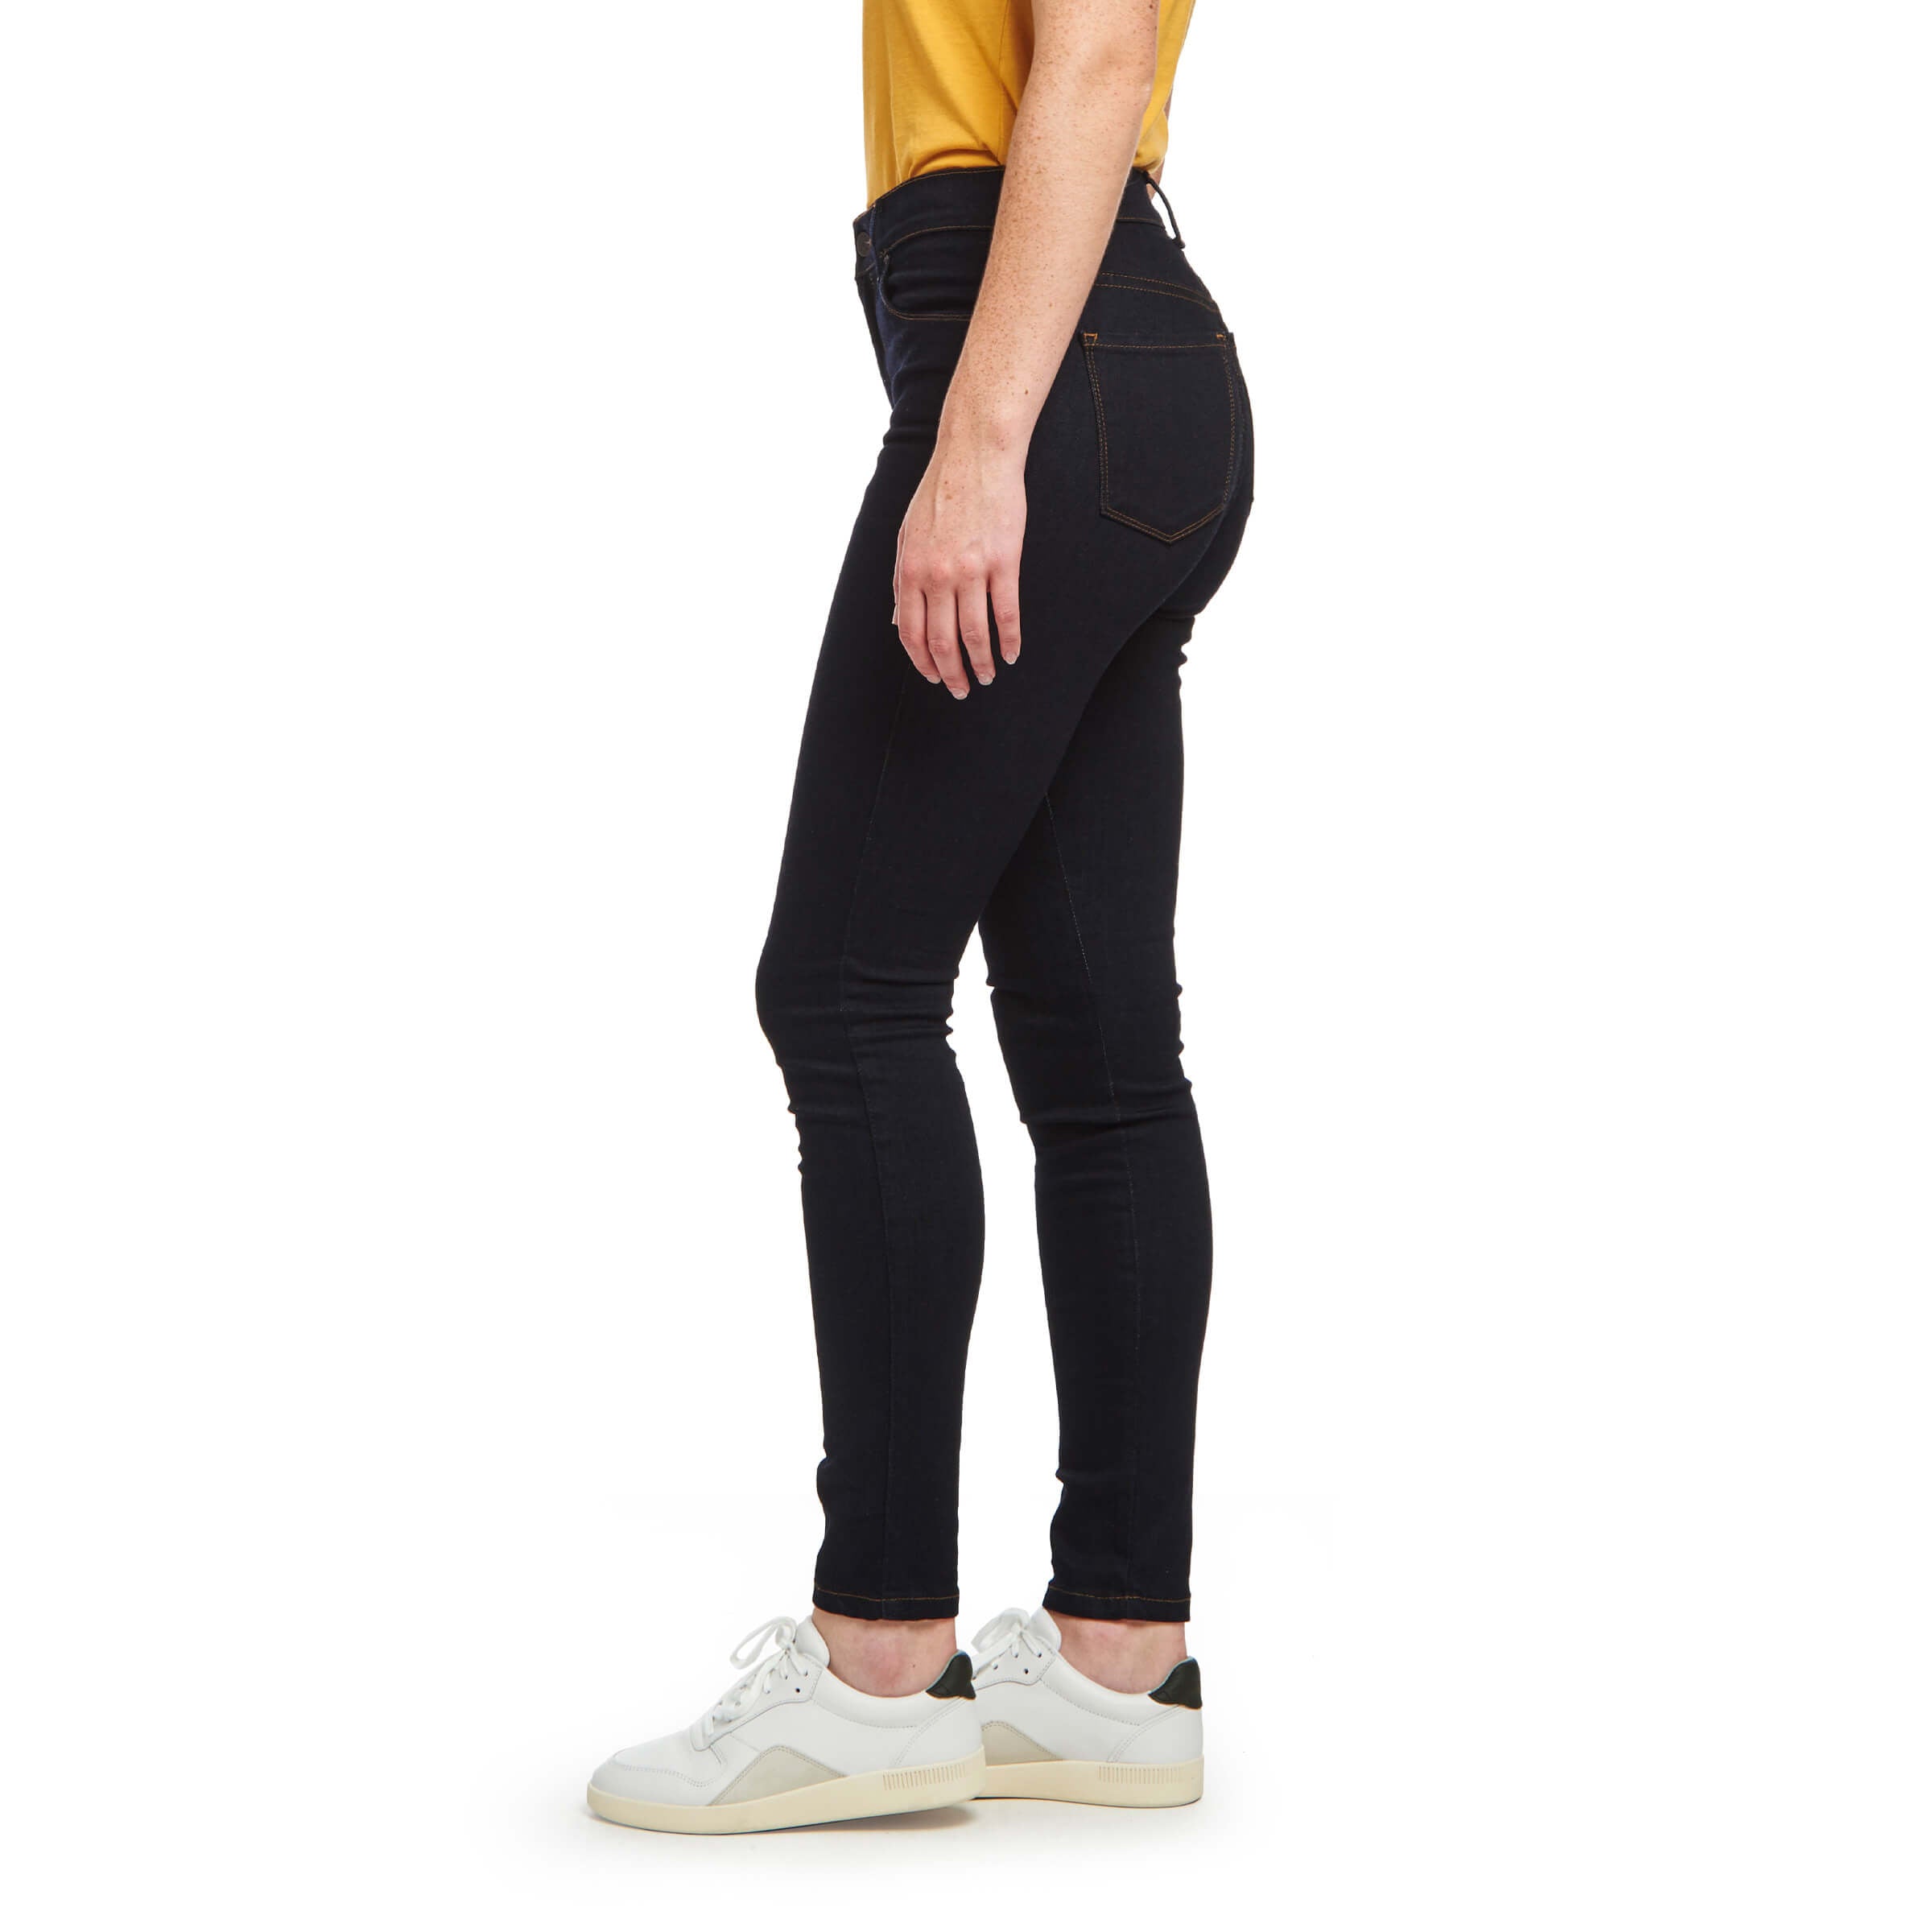 Women wearing Azul oscuro High Rise Skinny Moore Jeans